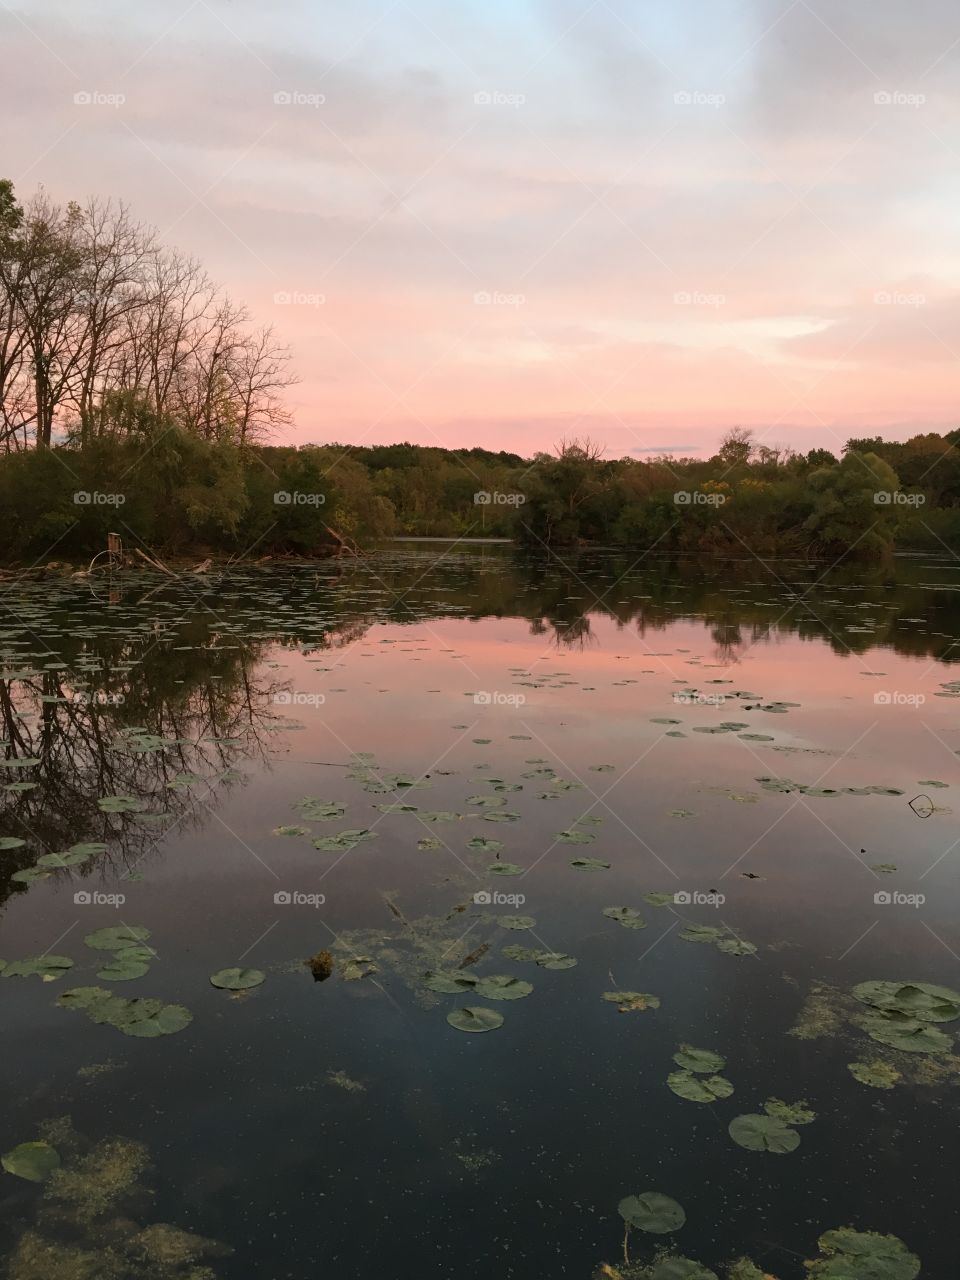 Lily pads at sunset